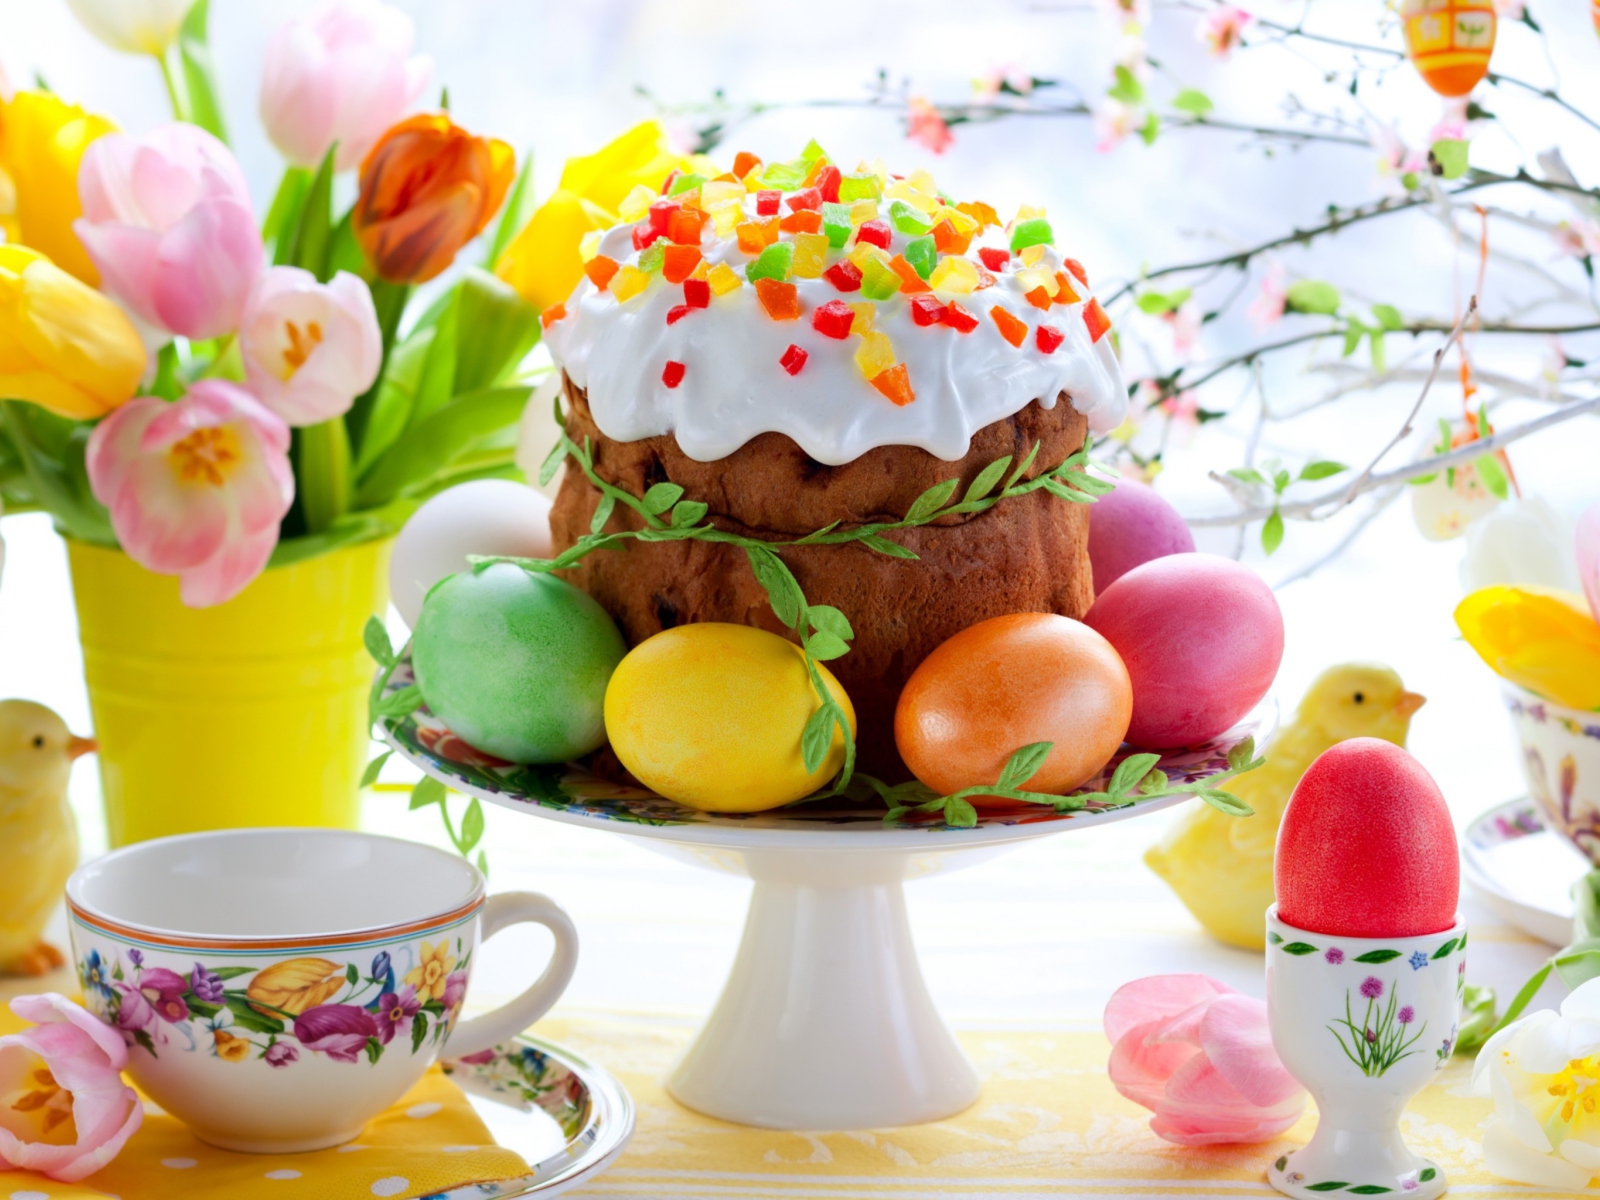 Easter Cake And Eggs wallpaper 1600x1200